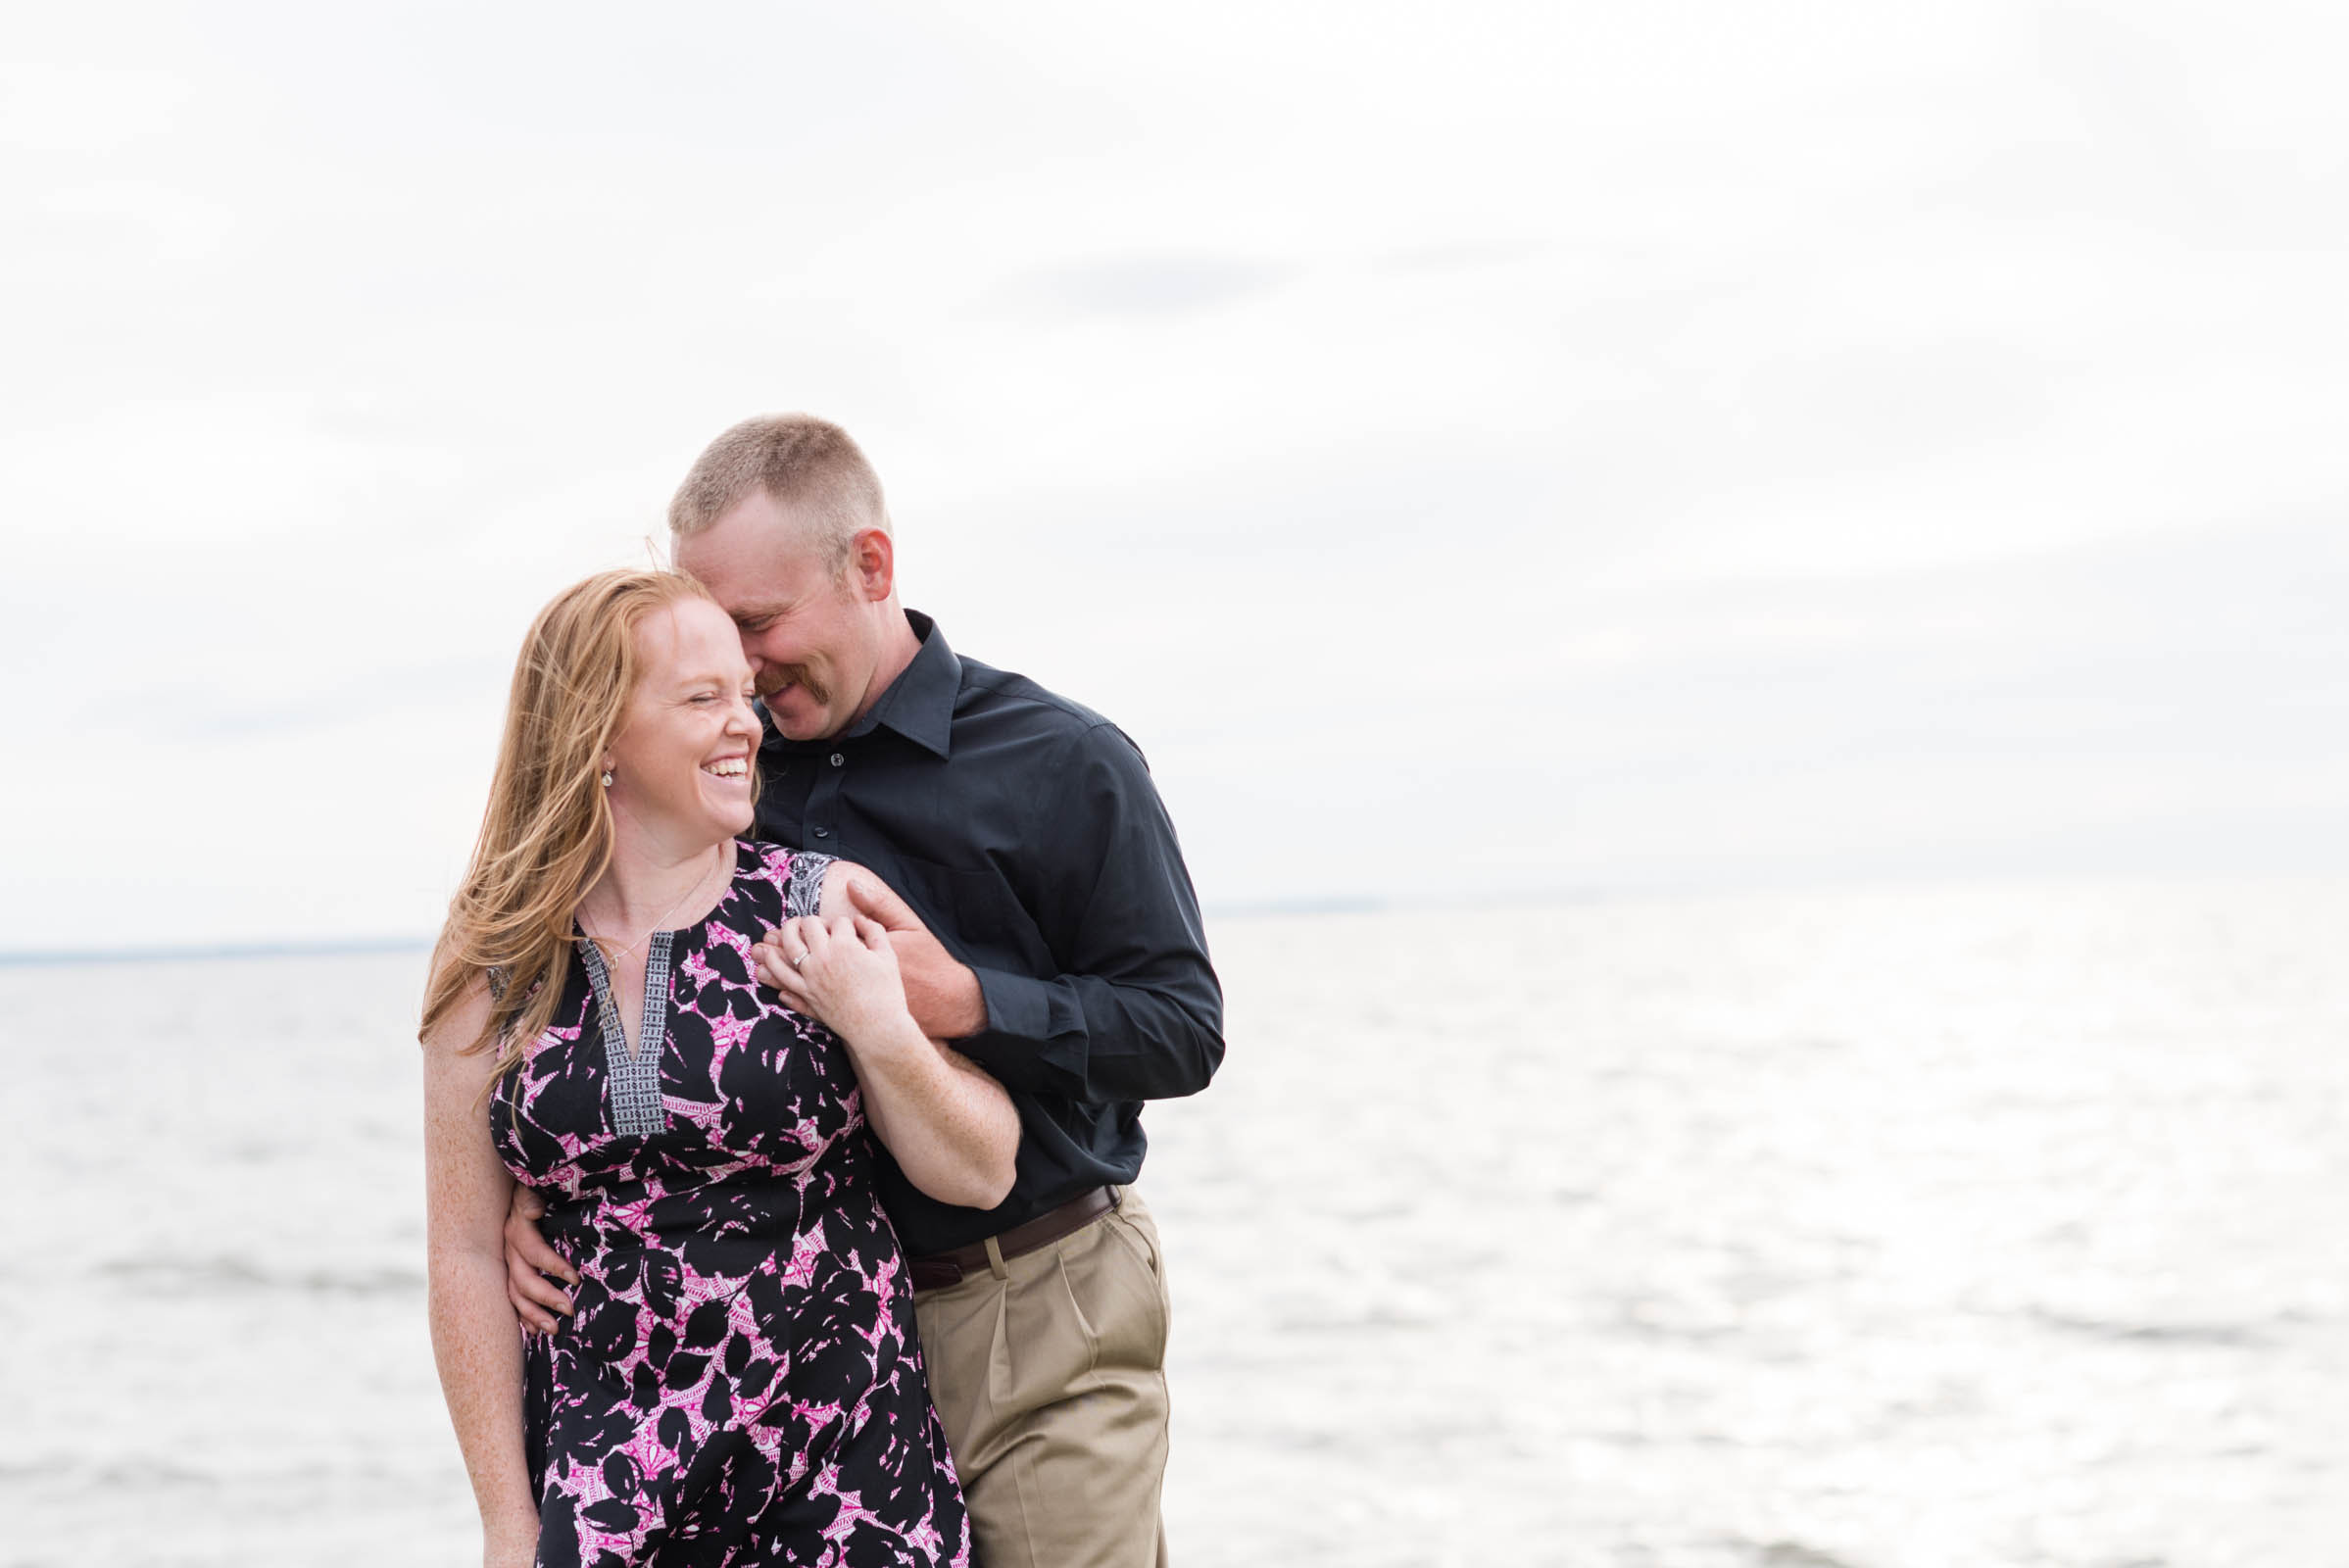 Katie and Marcus Engagement on Family Farm in Upstate New York